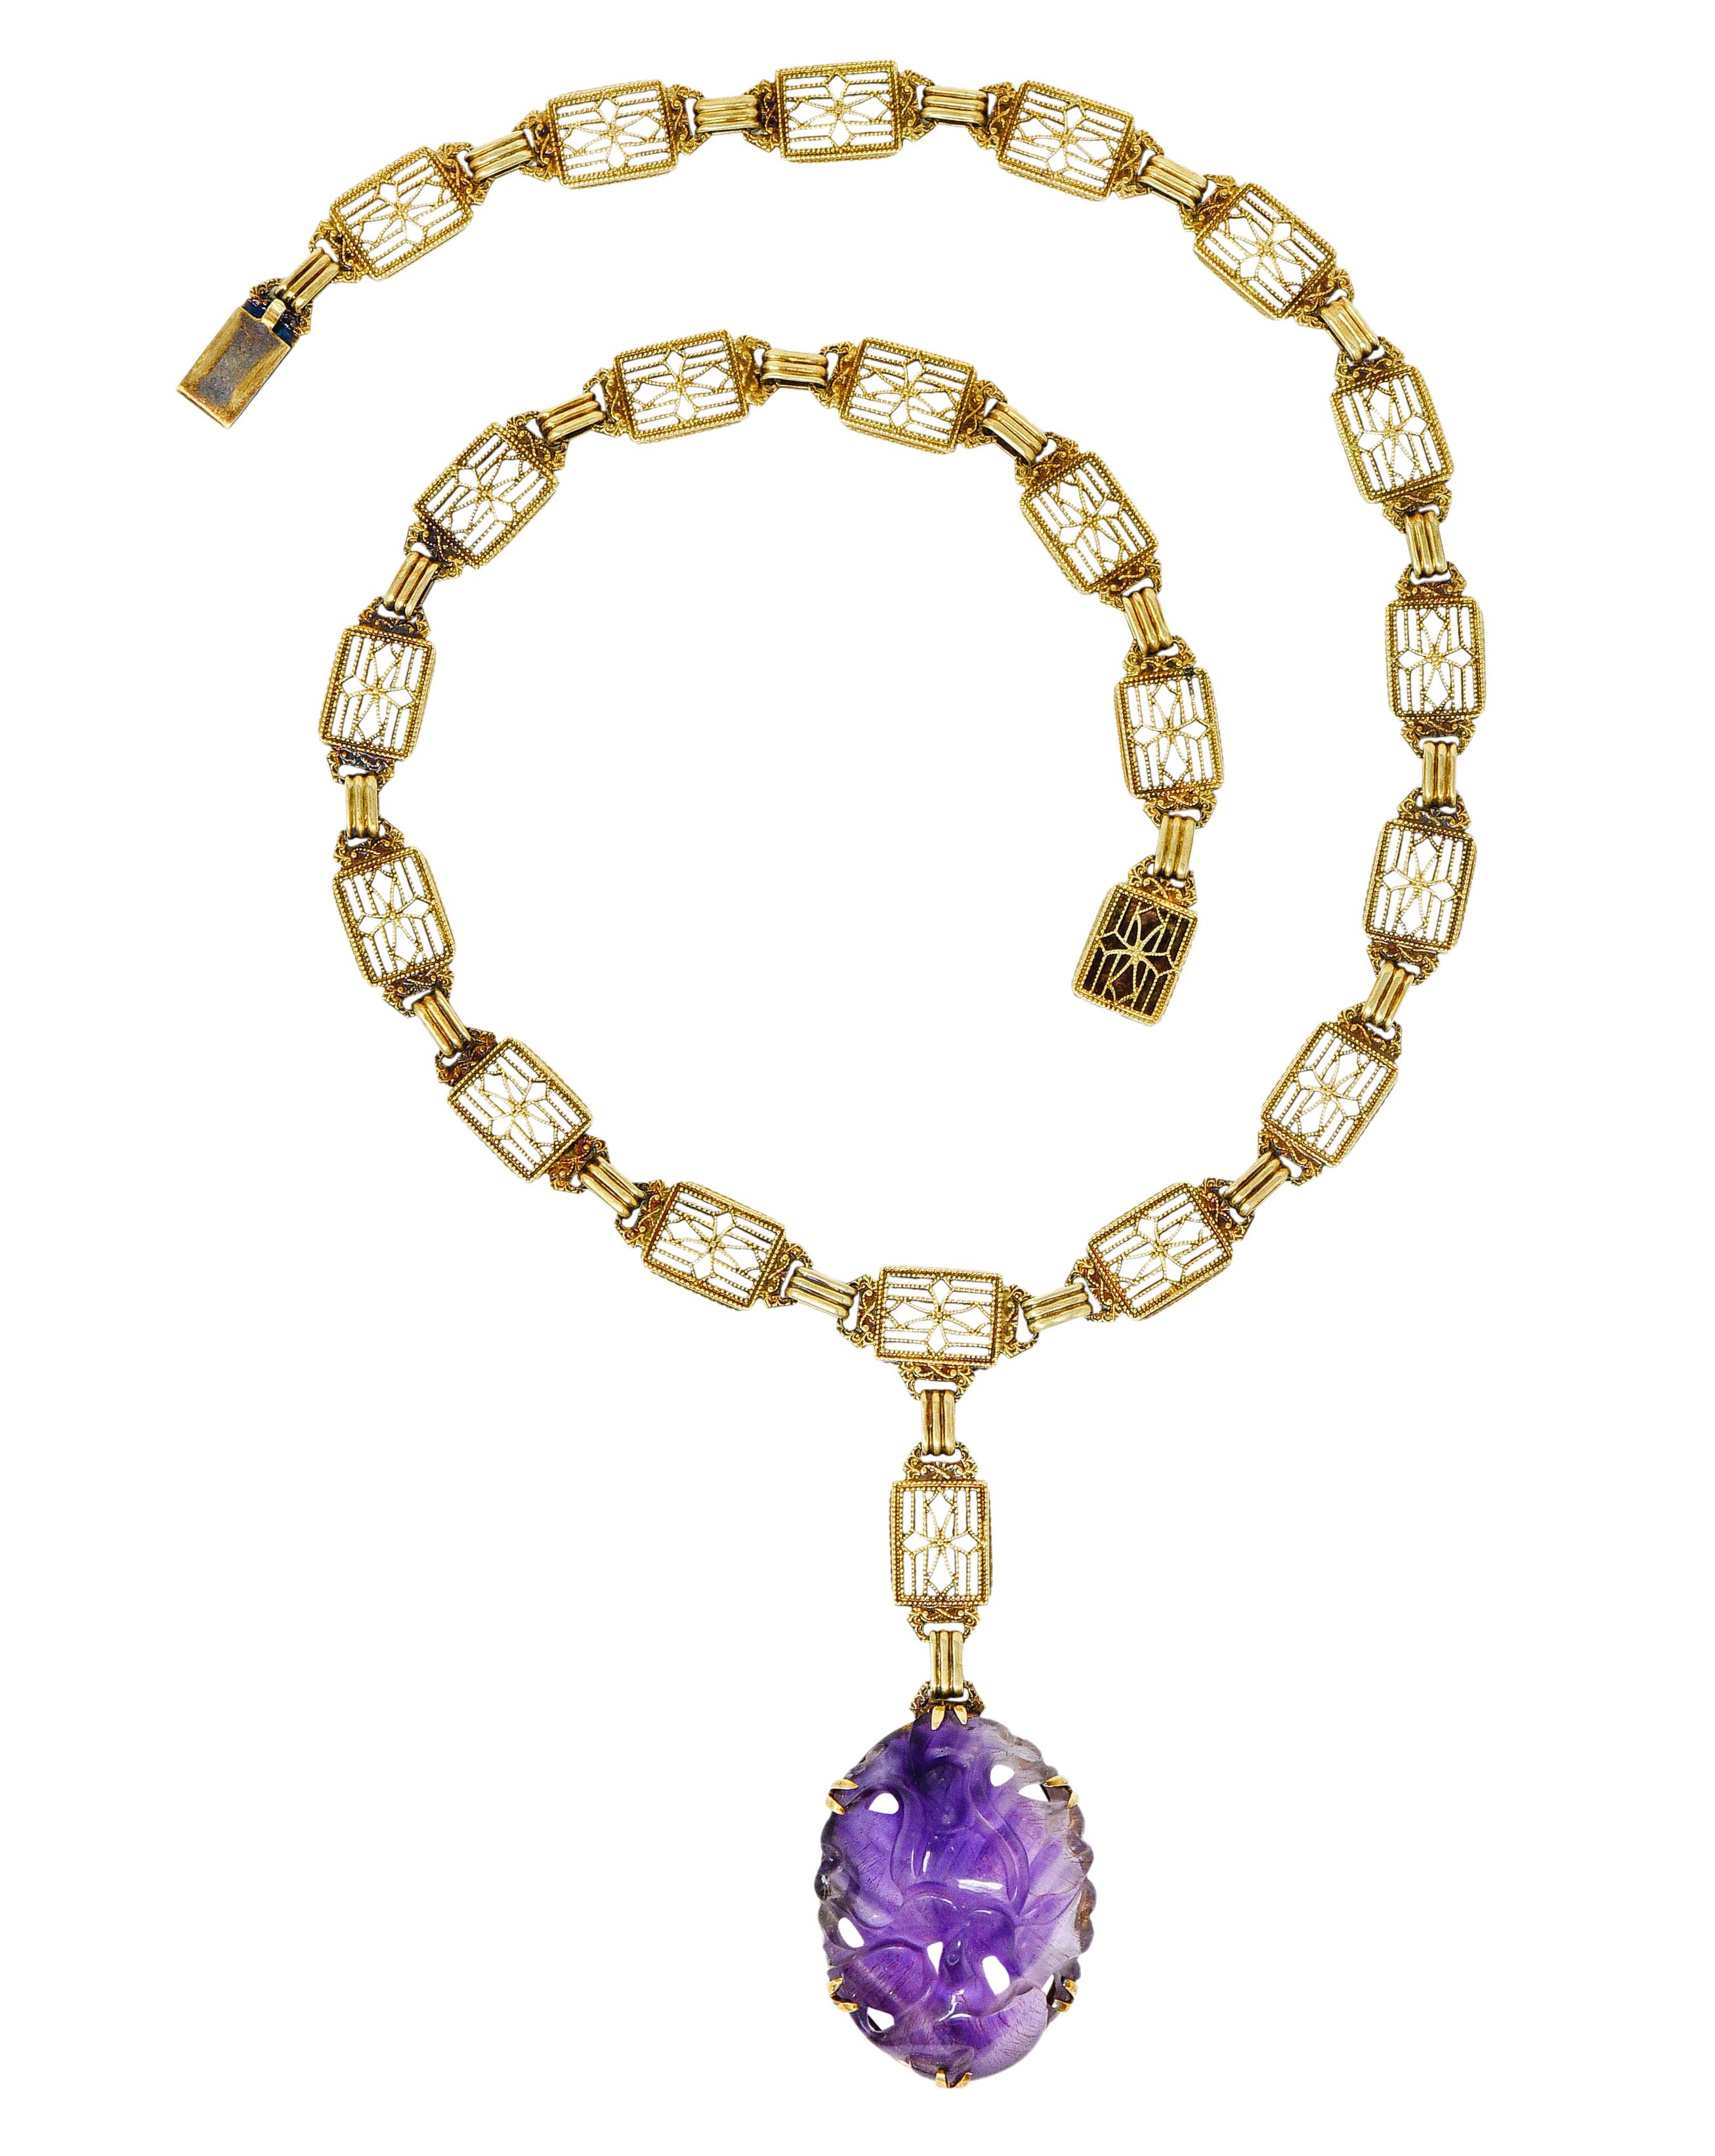 Necklace is comprised of rectangular links, pierced and with milgrain detail

Suspending a large oval drop of rutilated amethyst, deeply carved as a stylized flower

Amethyst is translucent with distinct clear to purple color zoning and features red